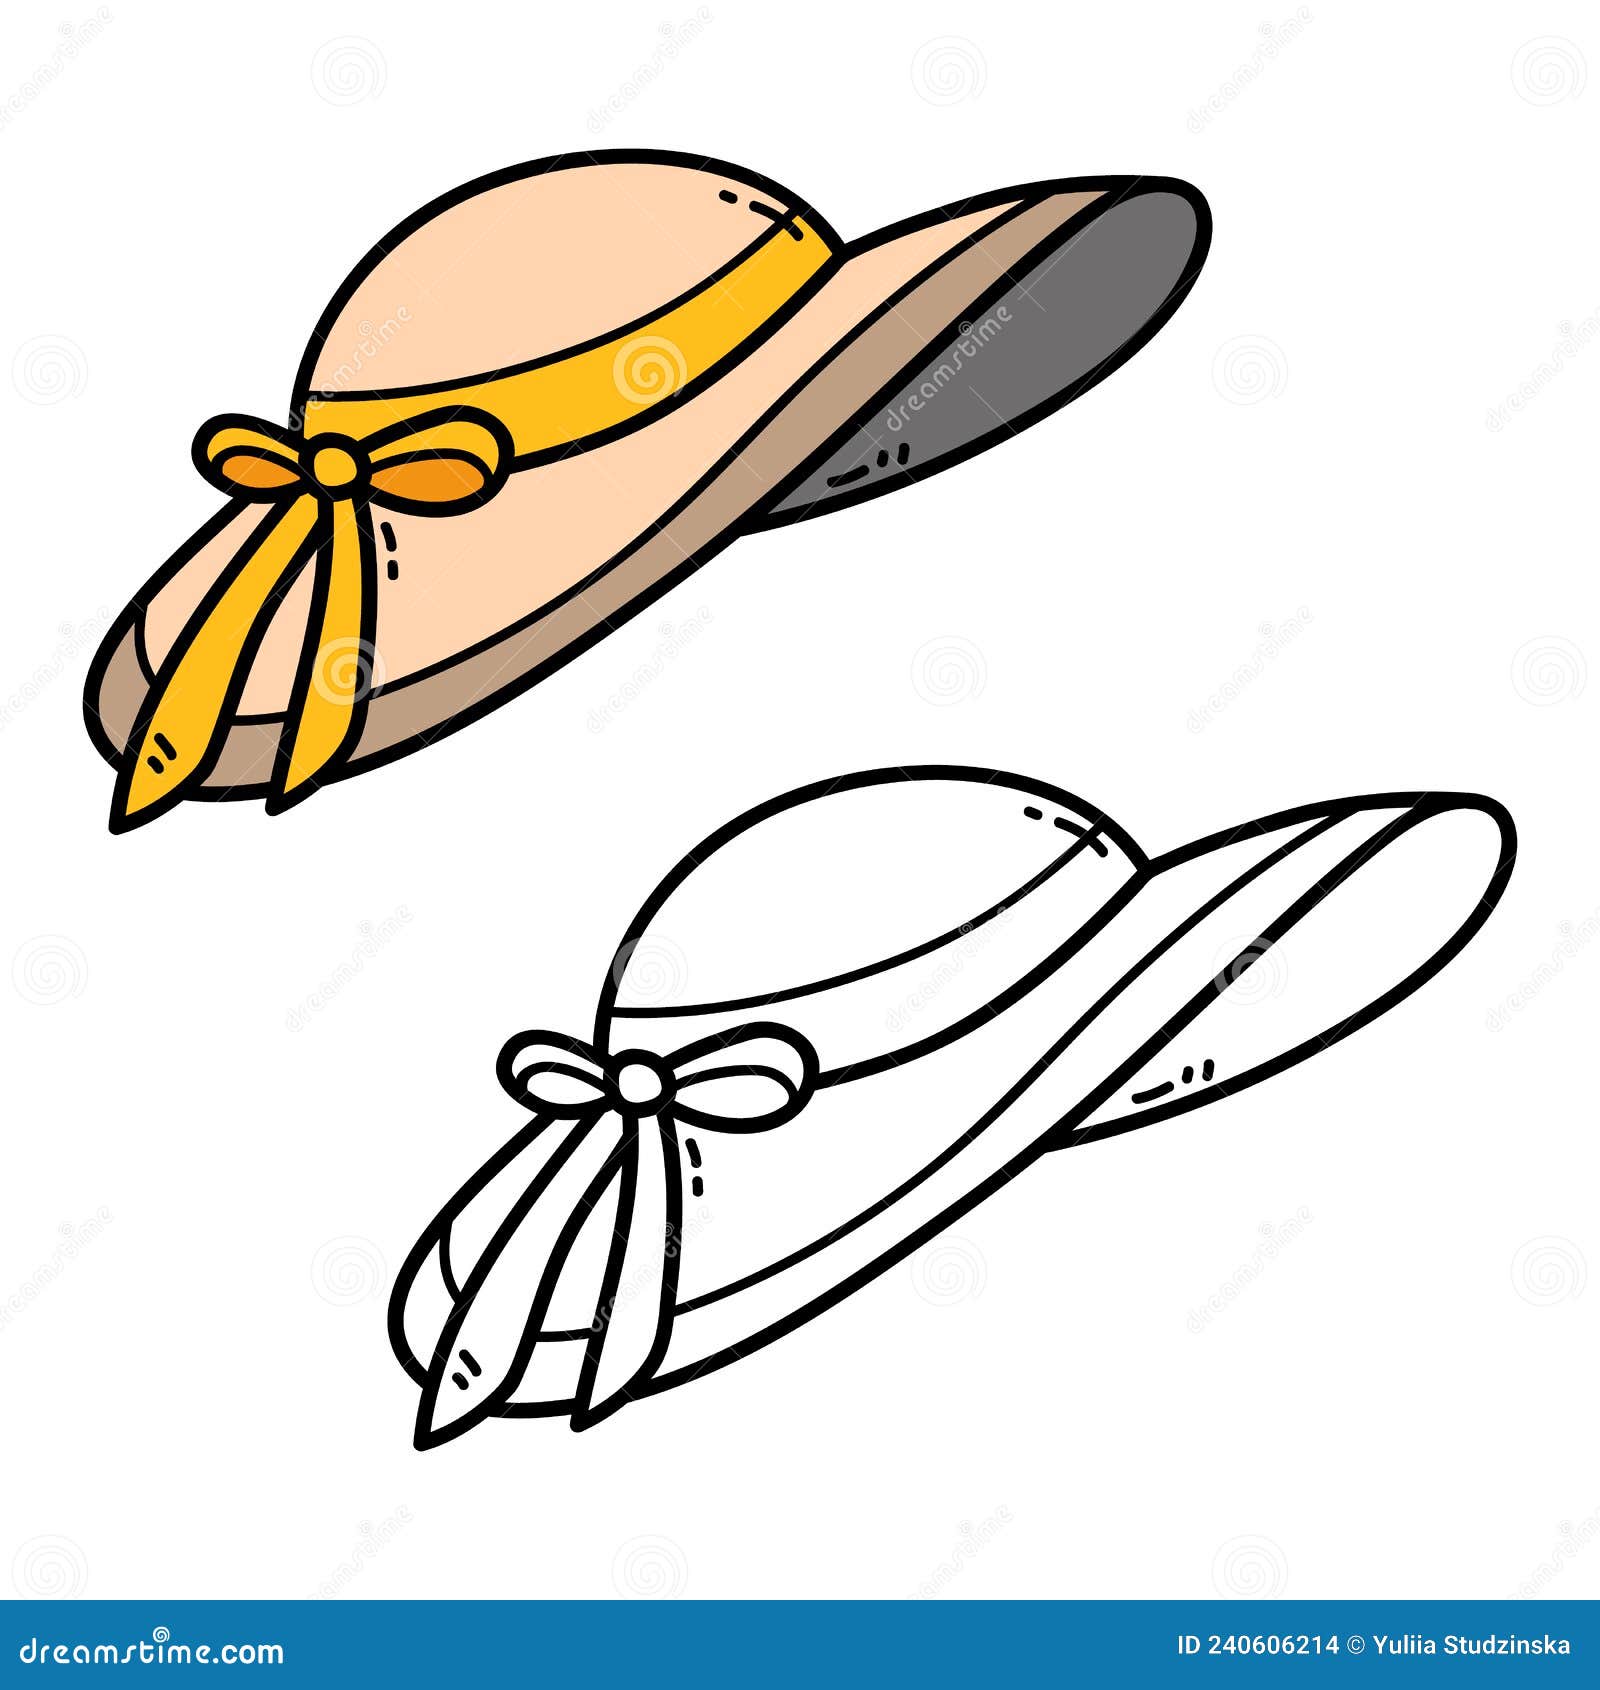 Coloring Page of Doodle Hat Stock Vector - Illustration of doodle ...